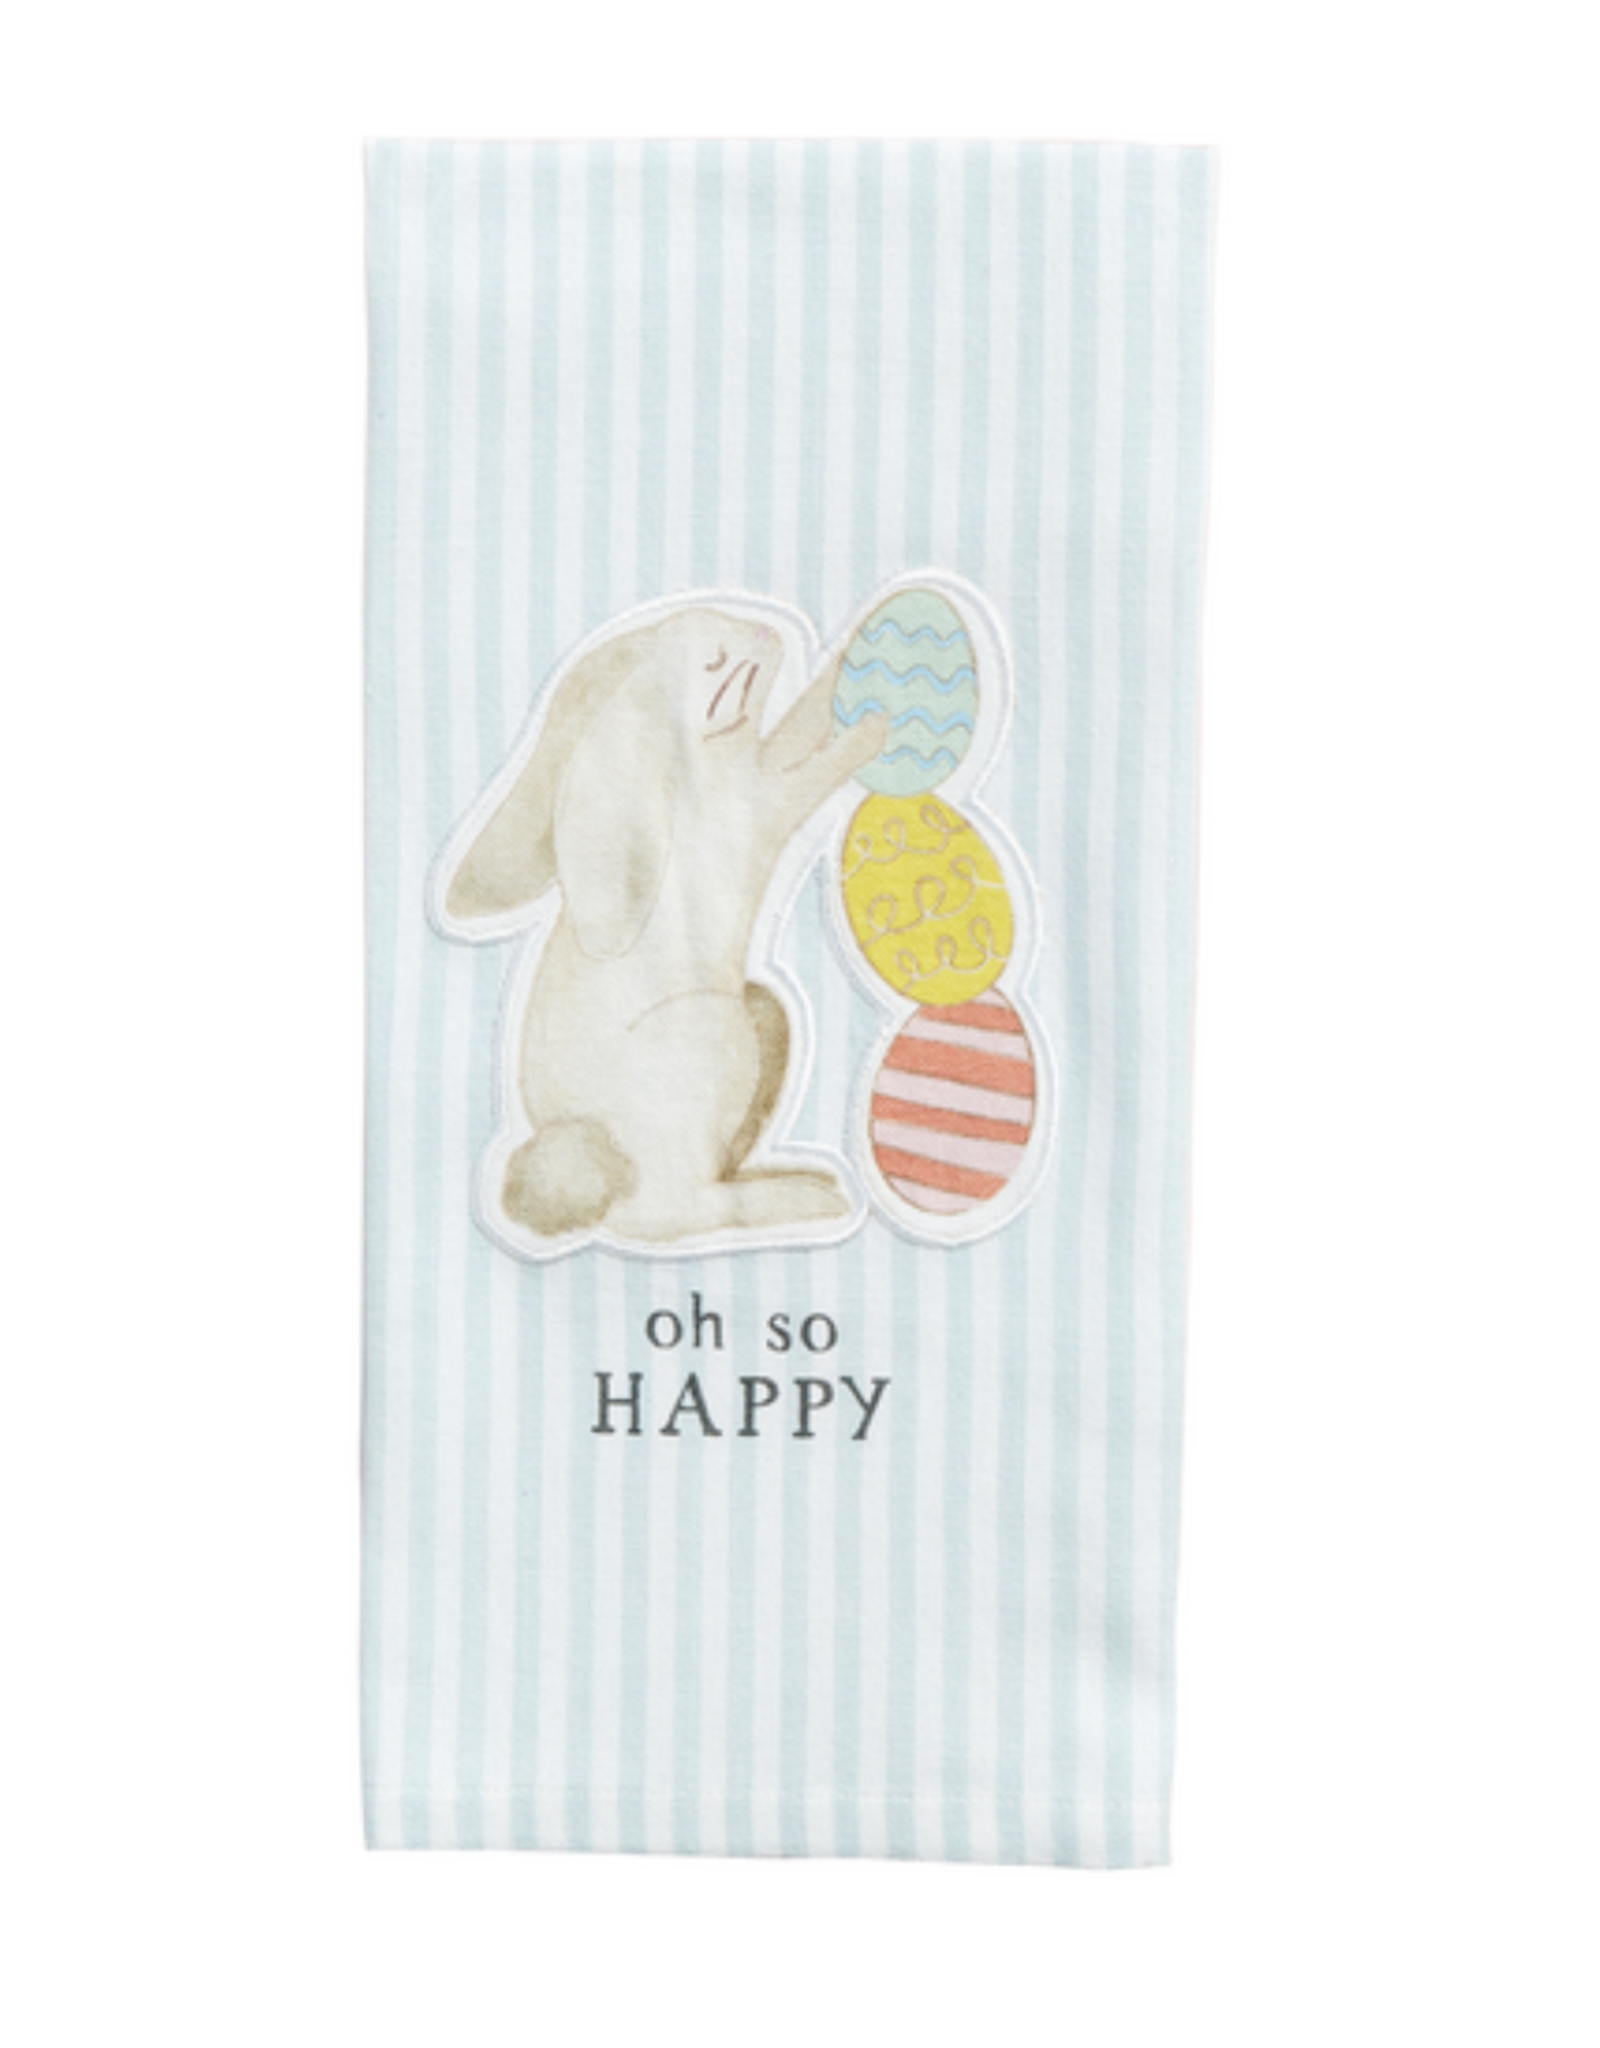 Mudpie Bunny with Egg Patch Towel